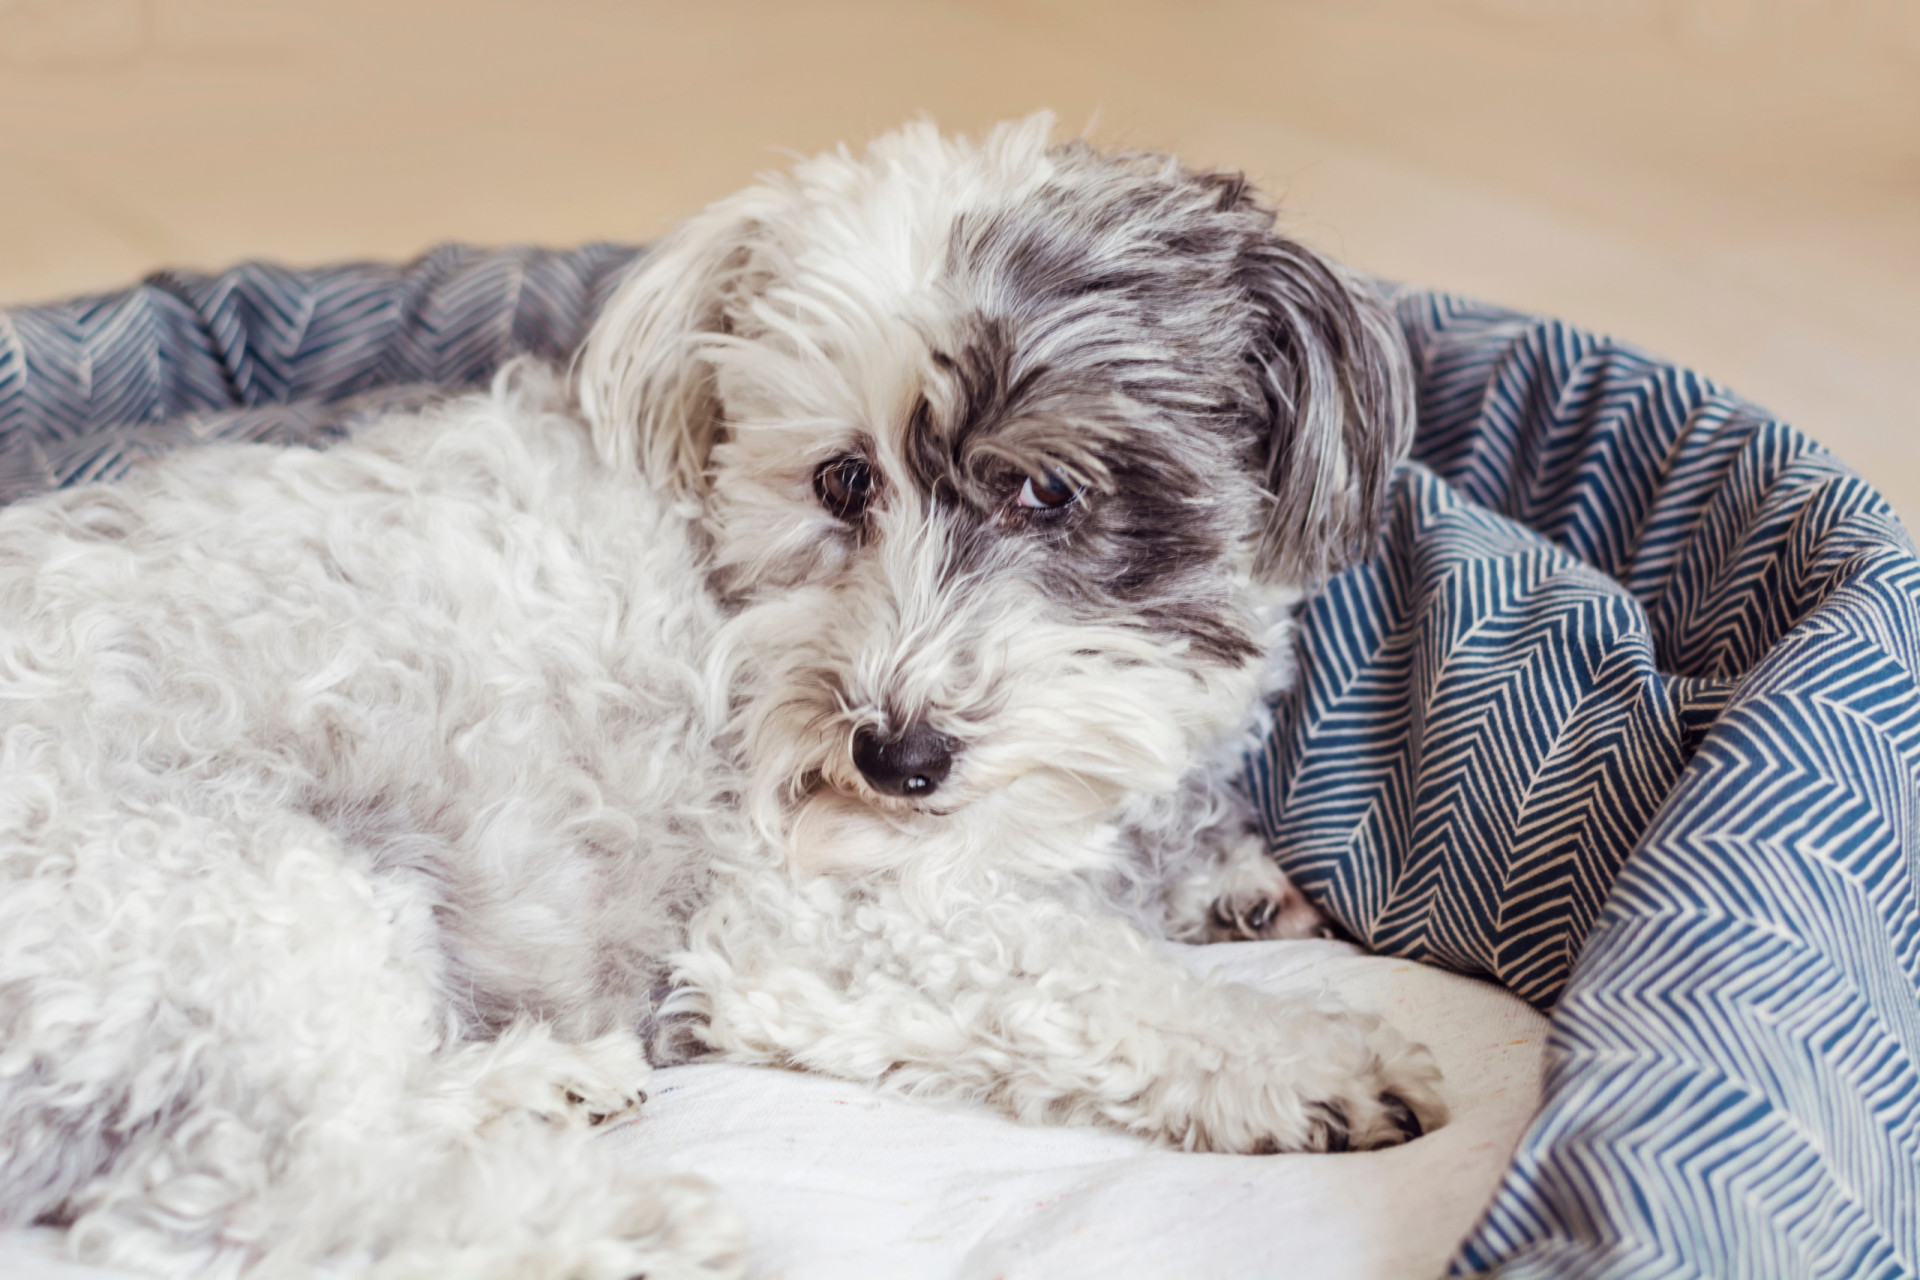 <p>The Havanese is an affectionate and entertaining pup that need very little exercise to be healthy. They live about 13 years. </p><p>You may also like:<a href="https://www.starsinsider.com/n/460432?utm_source=msn.com&utm_medium=display&utm_campaign=referral_description&utm_content=605595en-us"> Body dysmorphic disorder and the celebrities who suffer from it</a></p>